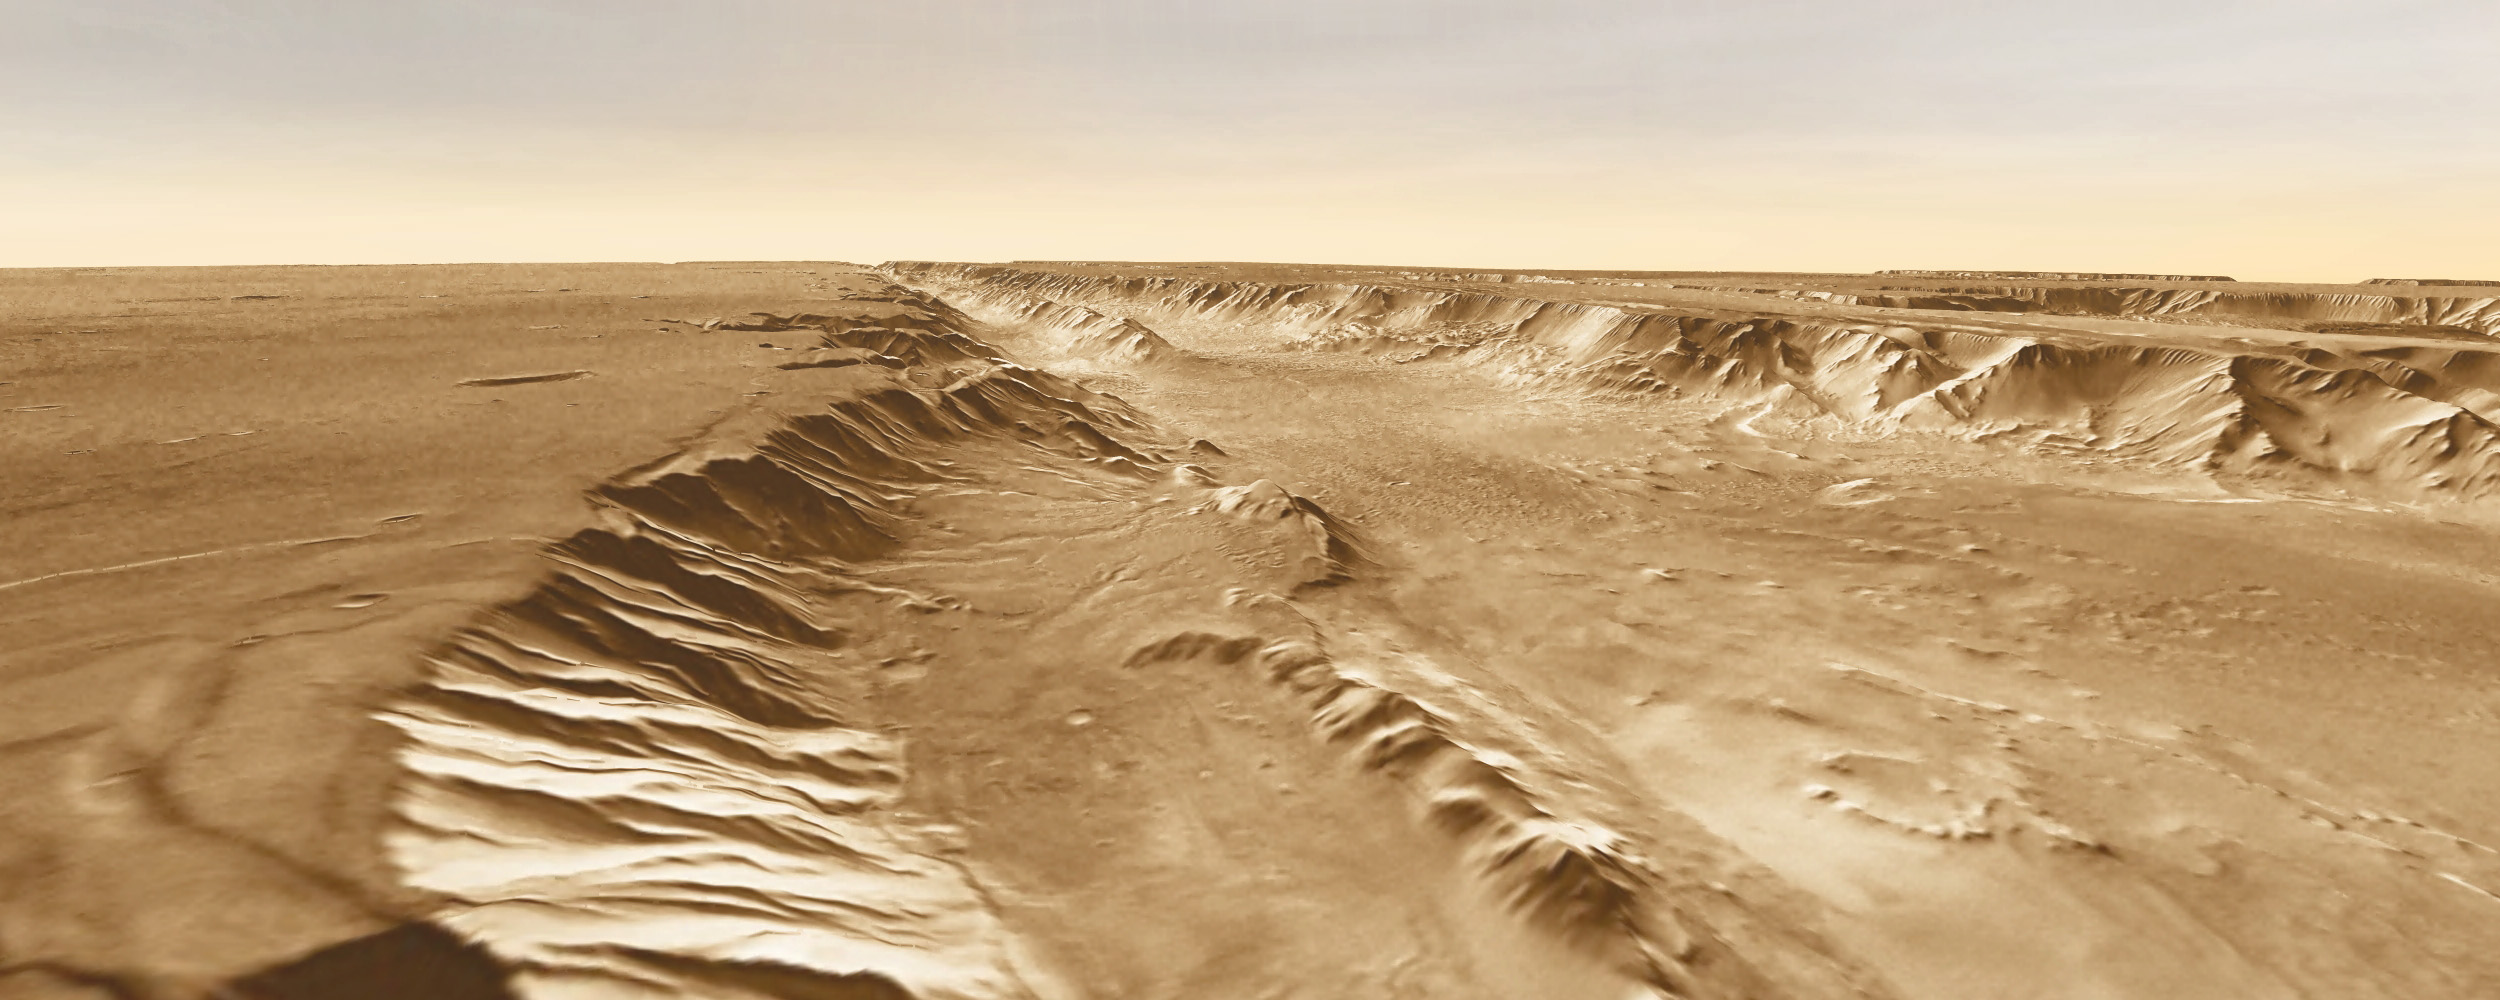 Where to Land on Mars: NASA Makes Progress in Quest for 2020 Rover Site